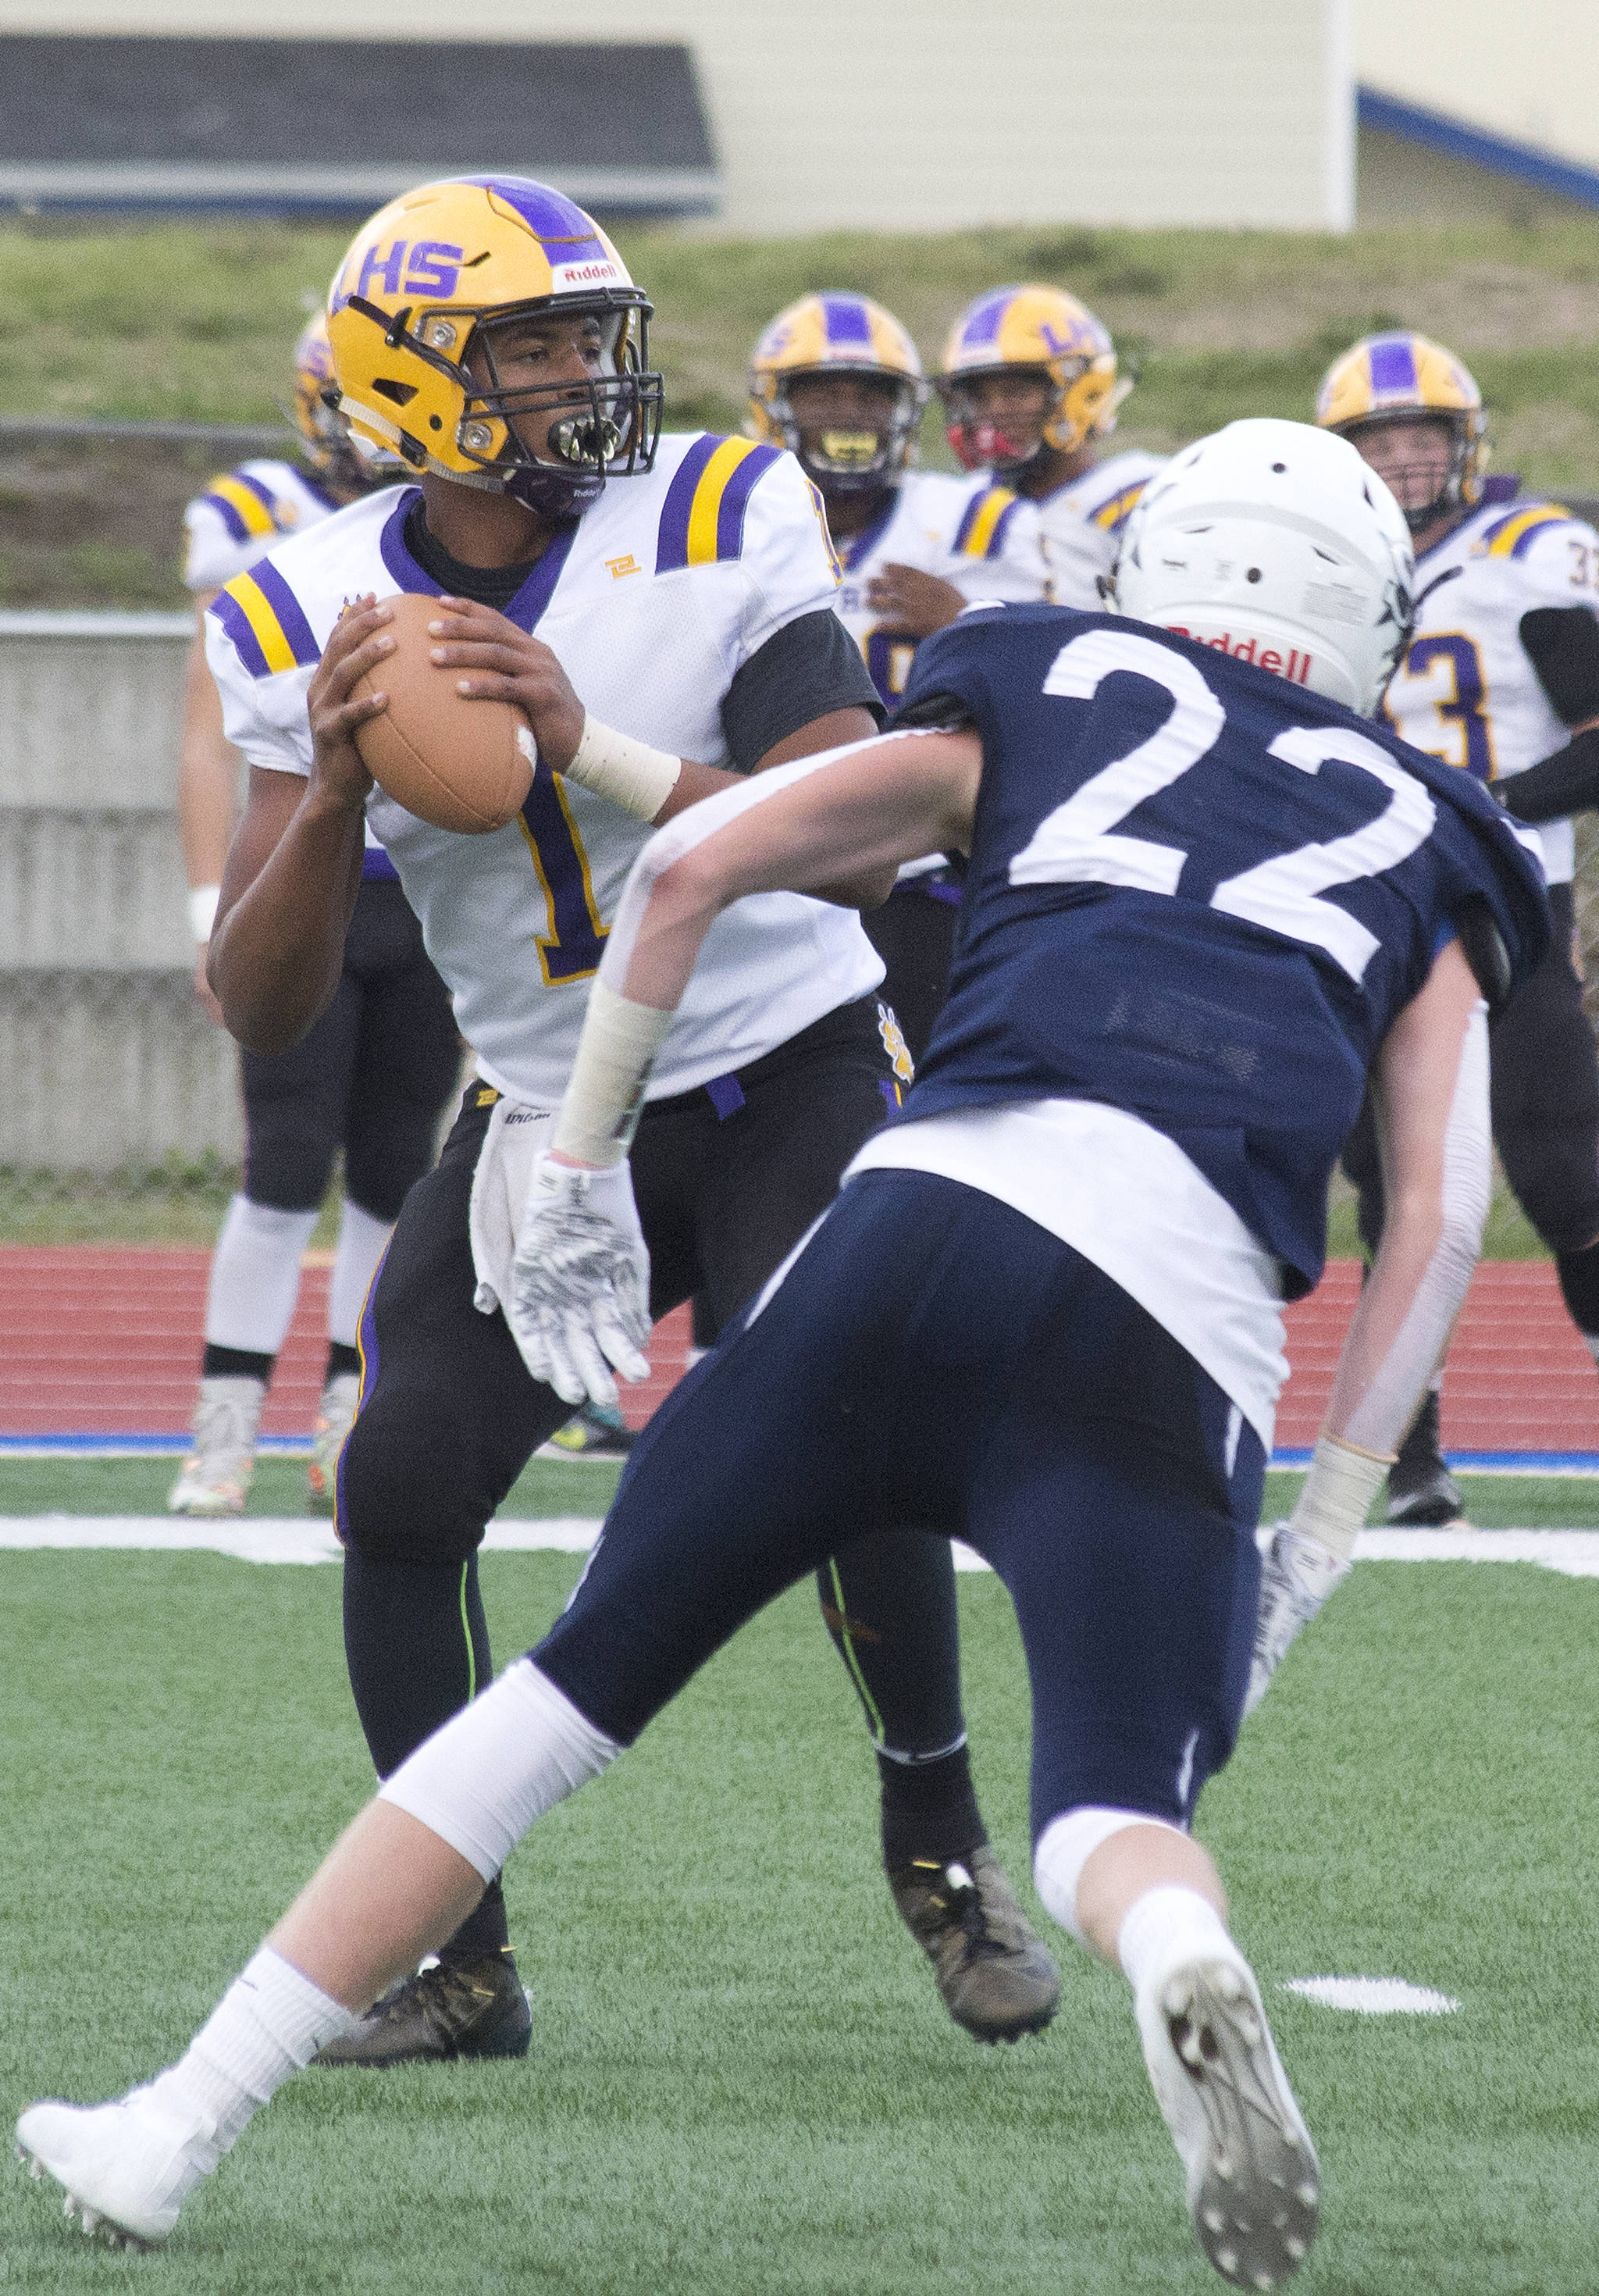 Lathrop quarterback Jace Henry looks for an open receiver against the onrushing Ray Chumley (22) Friday, Sept. 13, 2019, at Justin Maile Field in Soldotna, Alaska. (Photo by Joey Klecka/Peninsula Clarion)